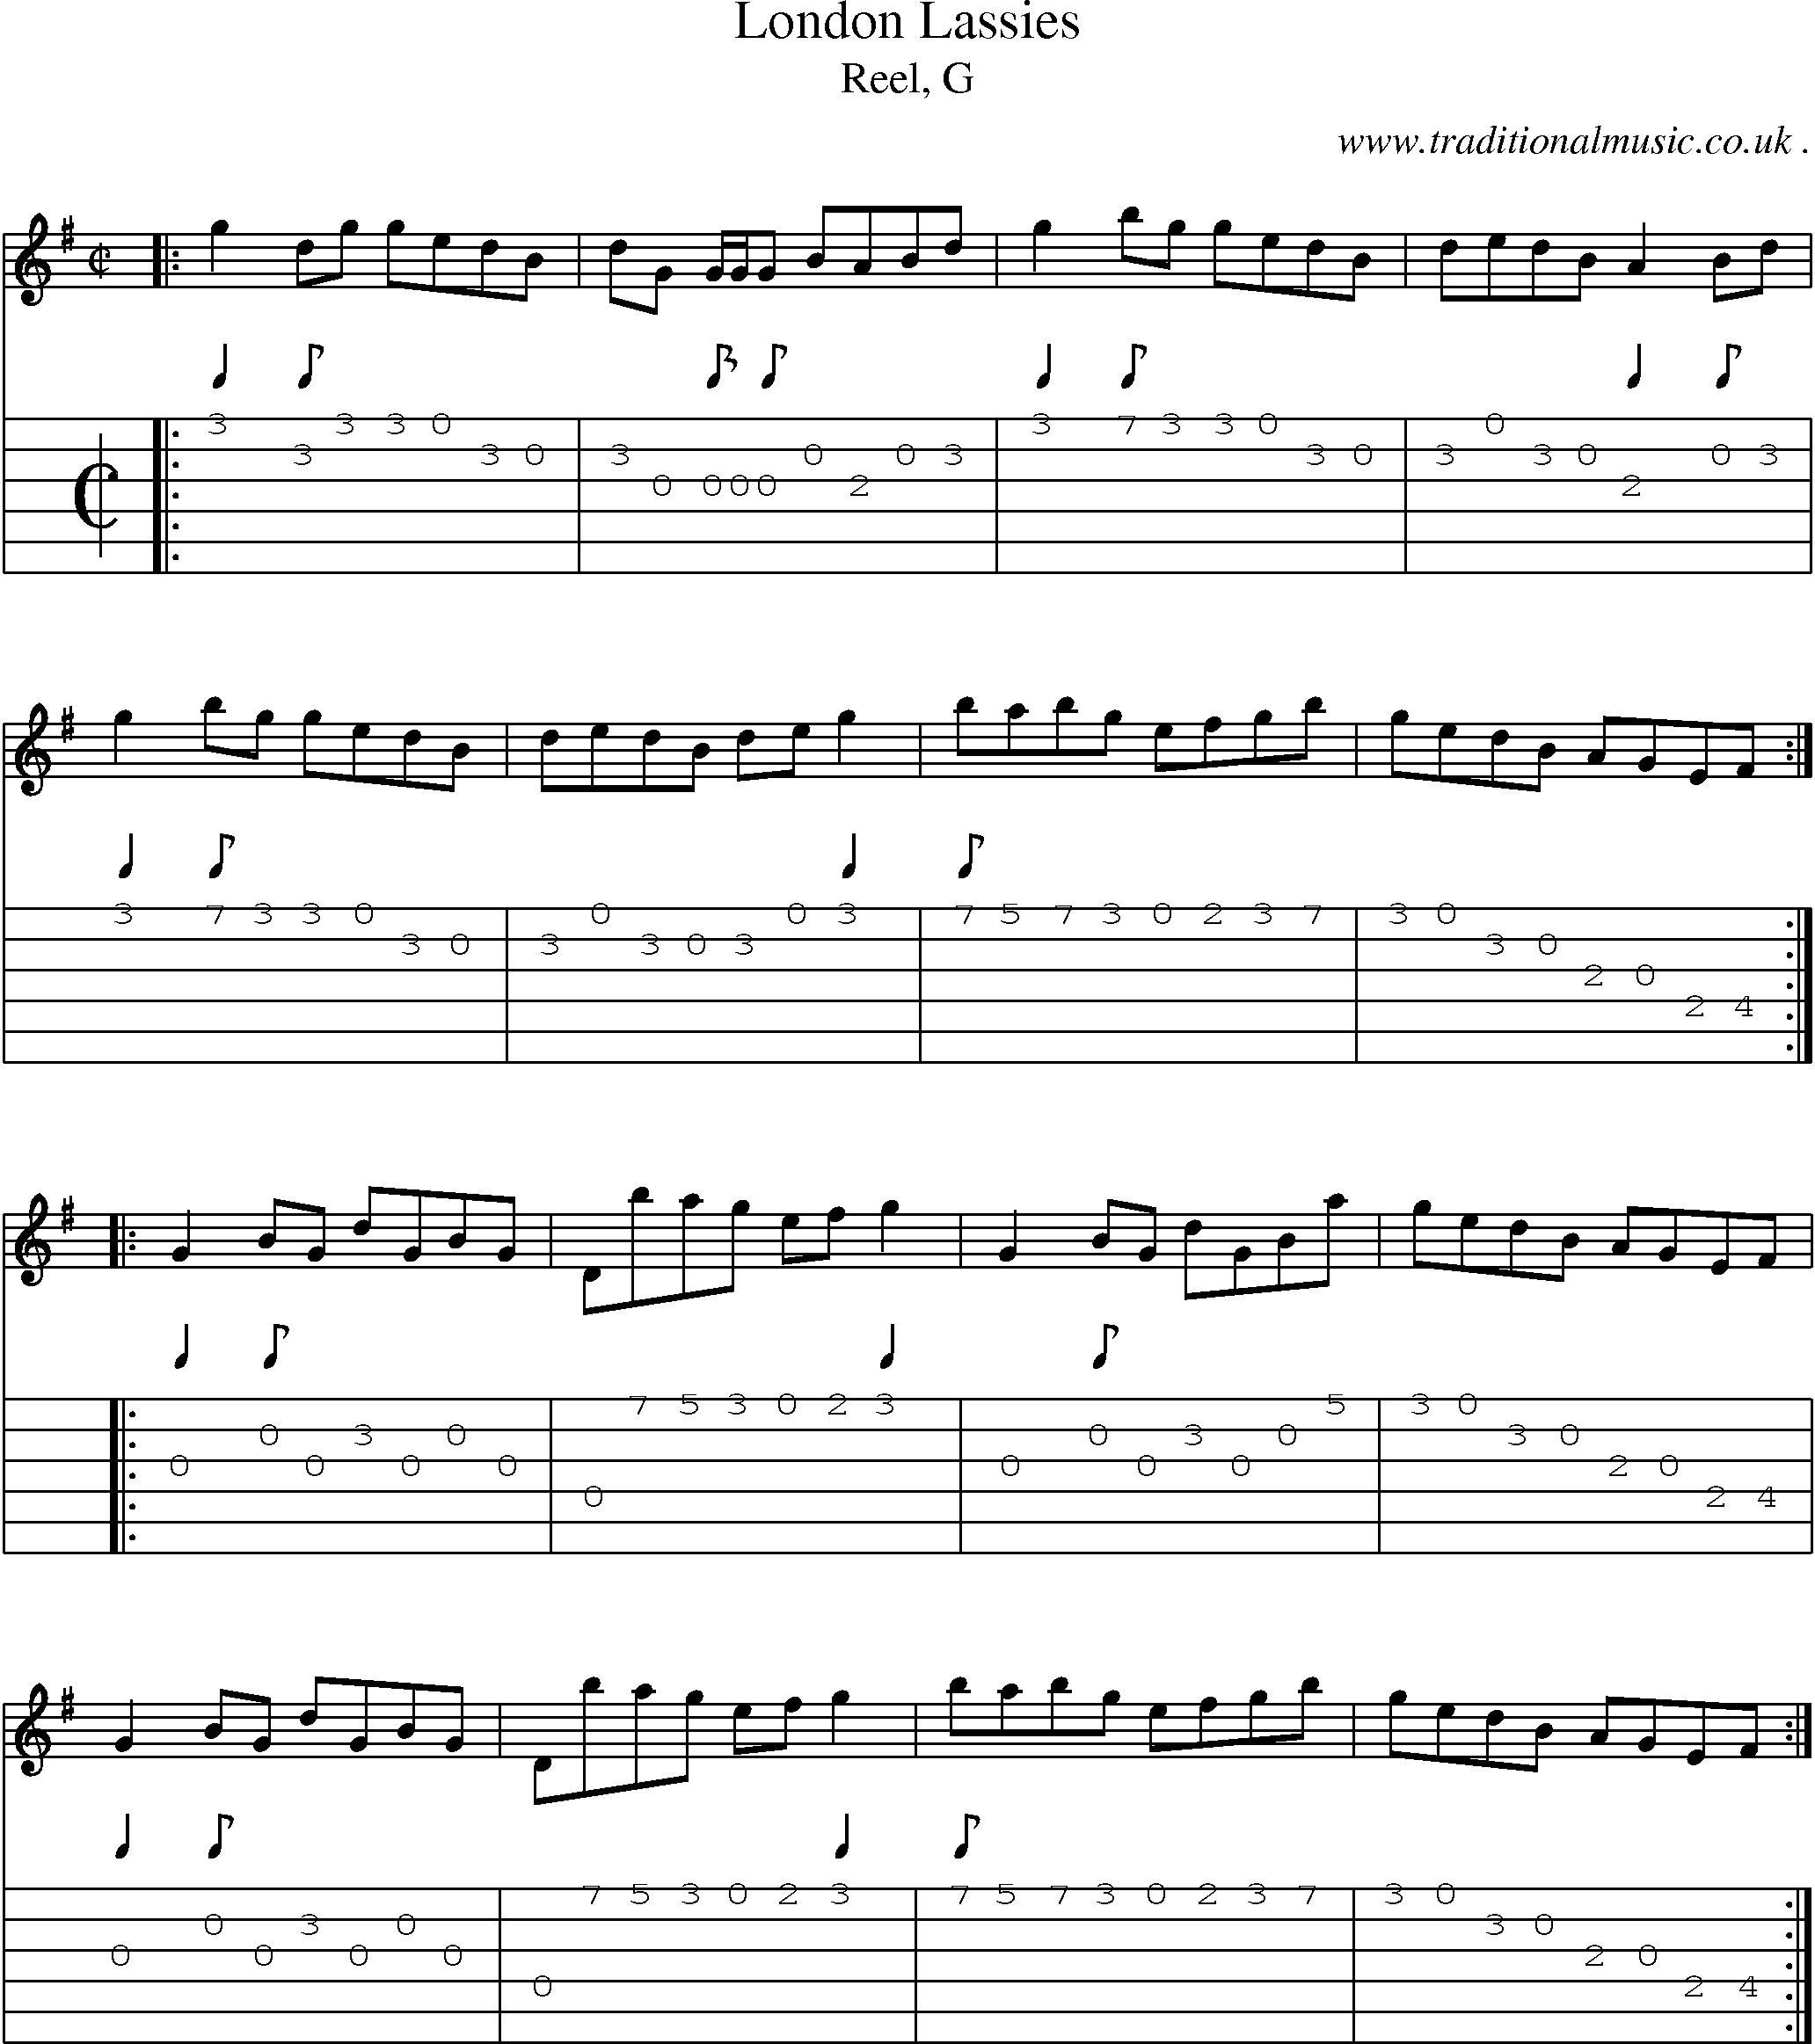 Sheet-music  score, Chords and Guitar Tabs for London Lassies